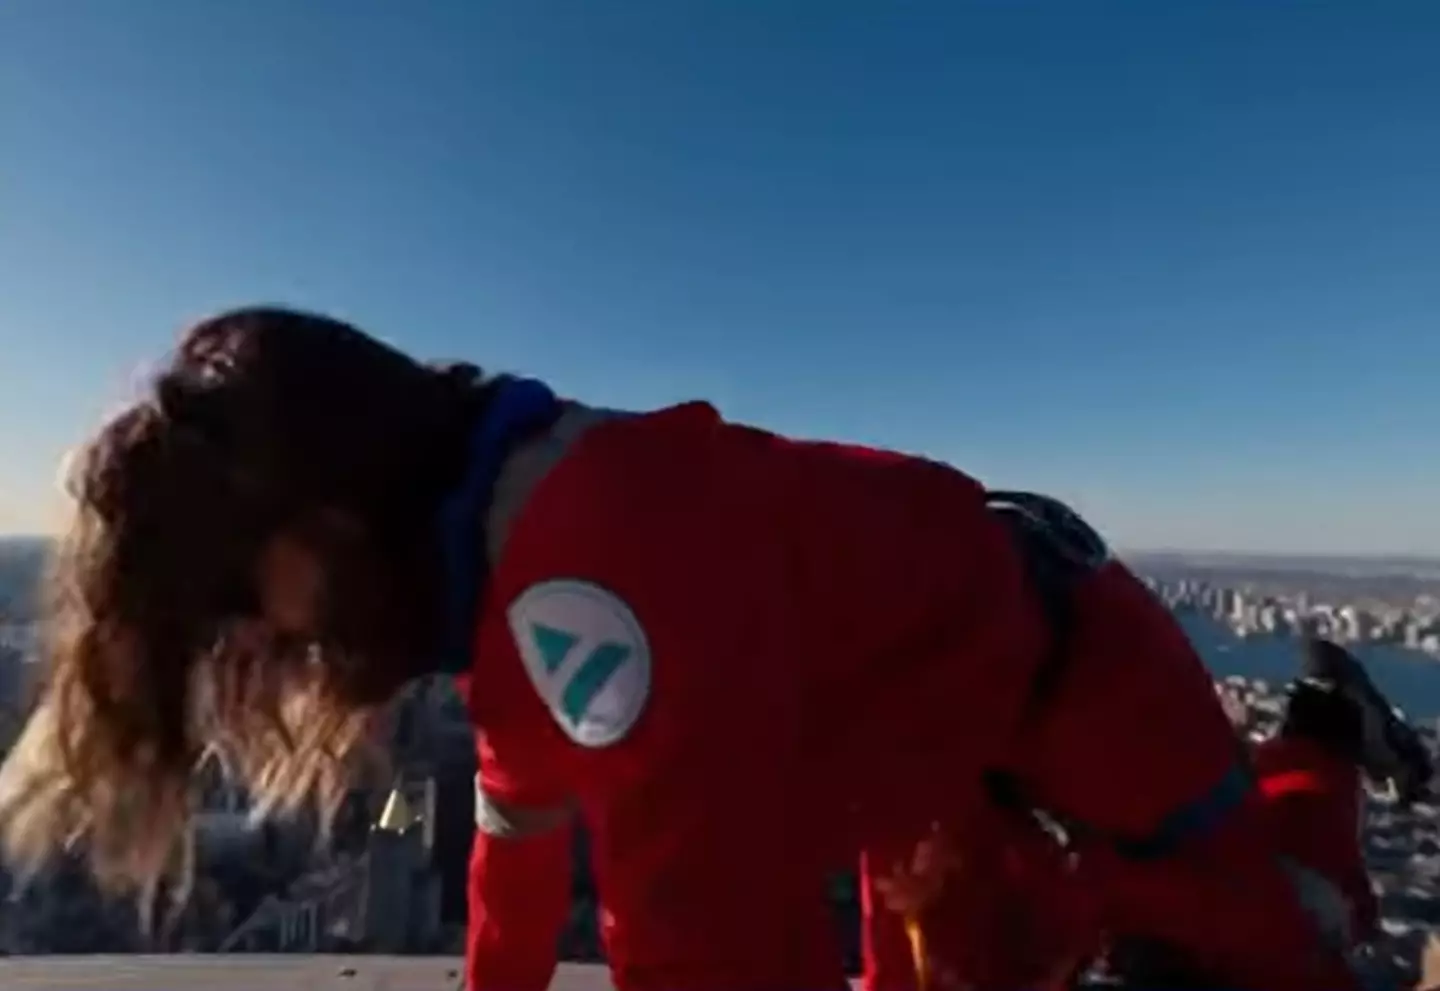 Jared Leto eventually made it to the top of the tower.